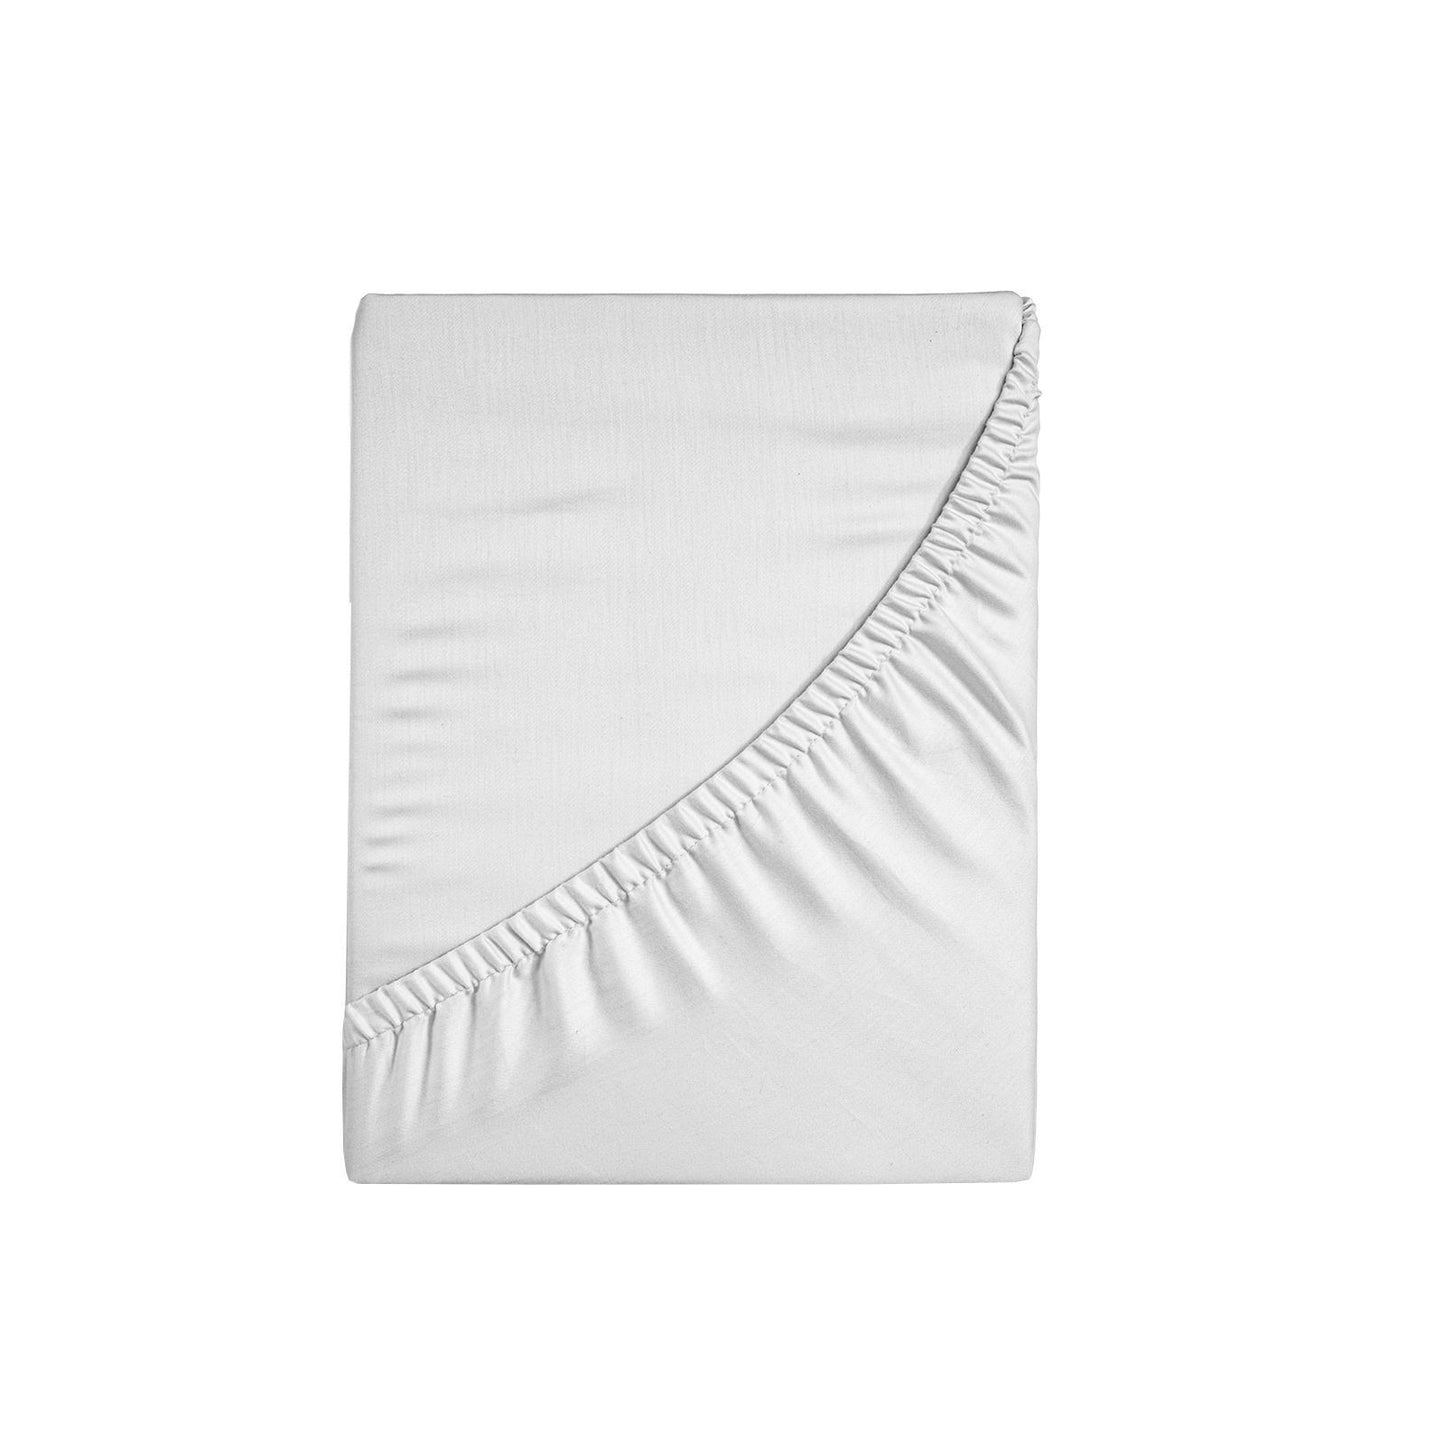 DOUBLE 1500TC 3-Piece Cotton Rich Fitted Sheet Sets - White